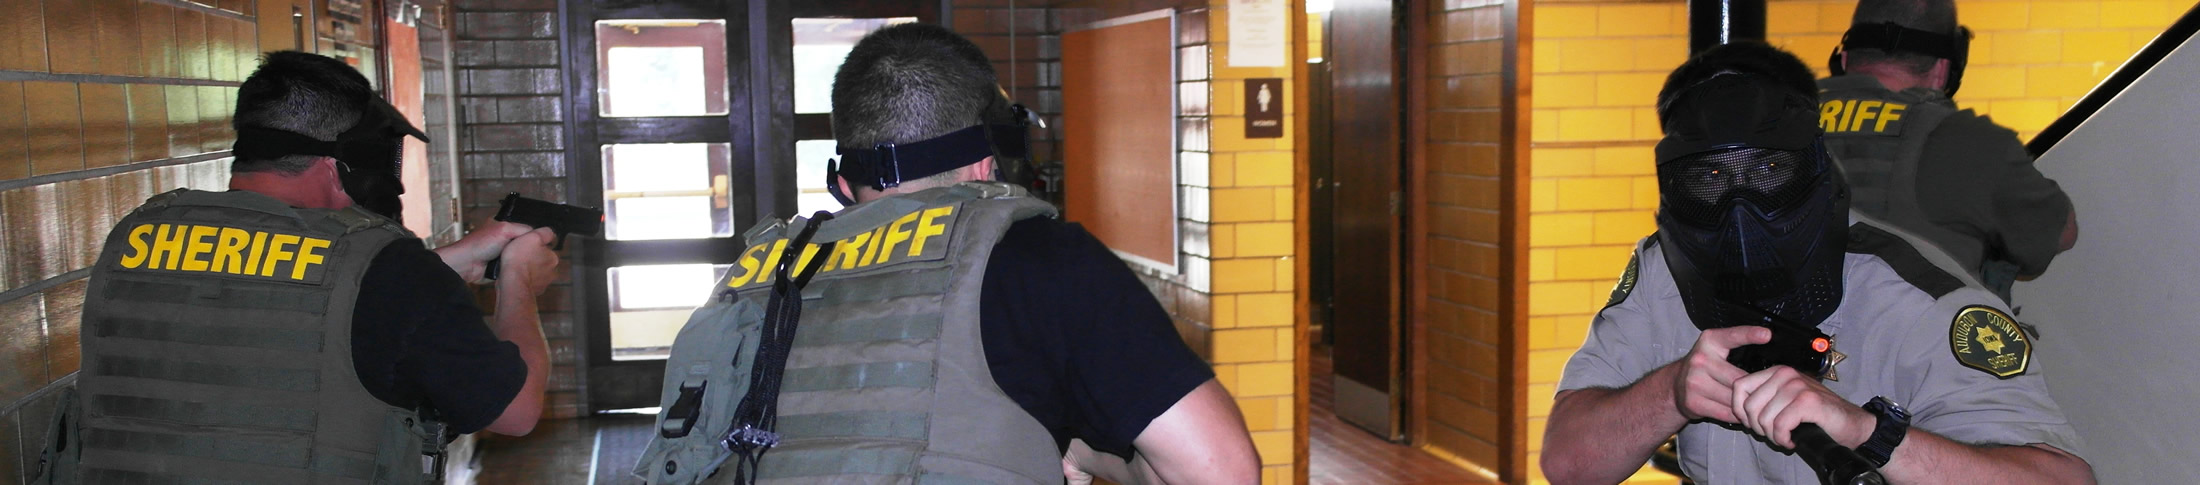 active shooter response training for law enforcement